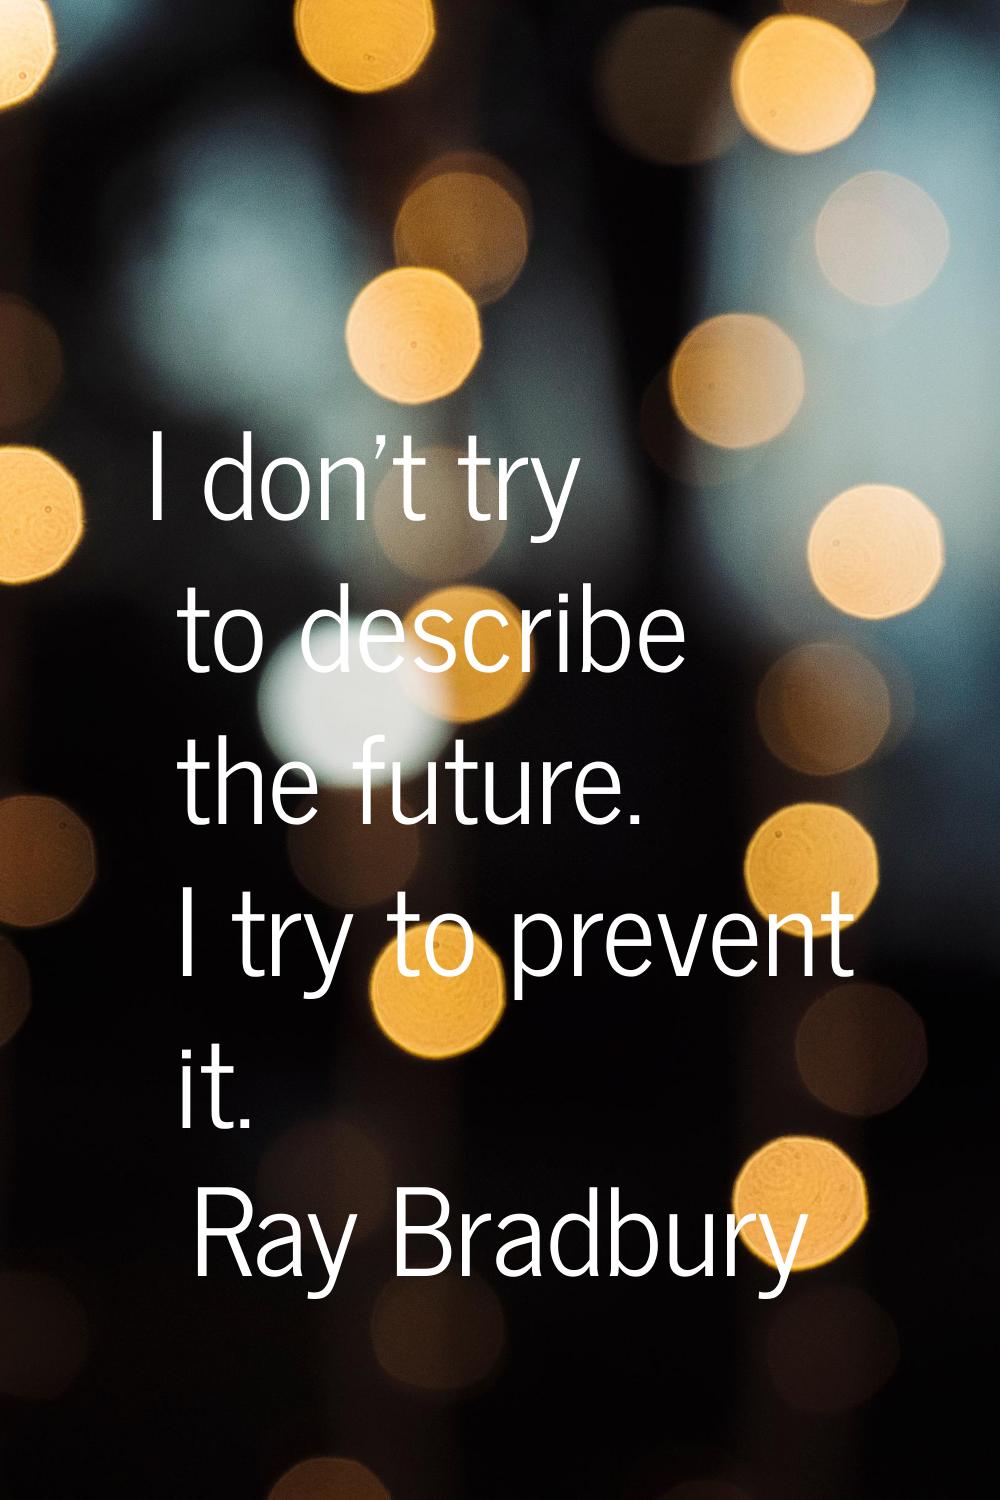 I don't try to describe the future. I try to prevent it.